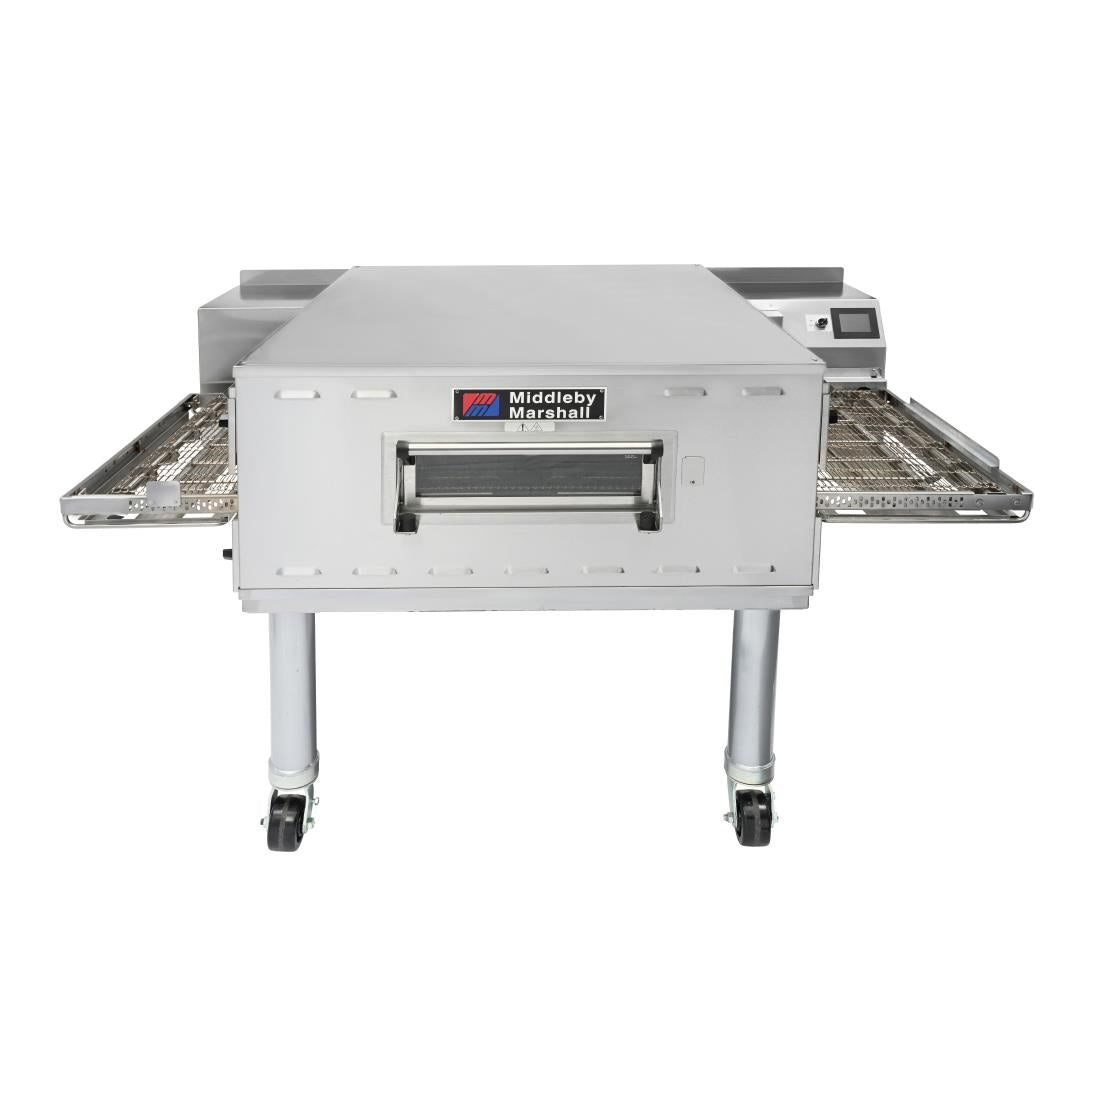 CH242 Middleby Marshall Ventless Conveyor Oven PS638E-V JD Catering Equipment Solutions Ltd